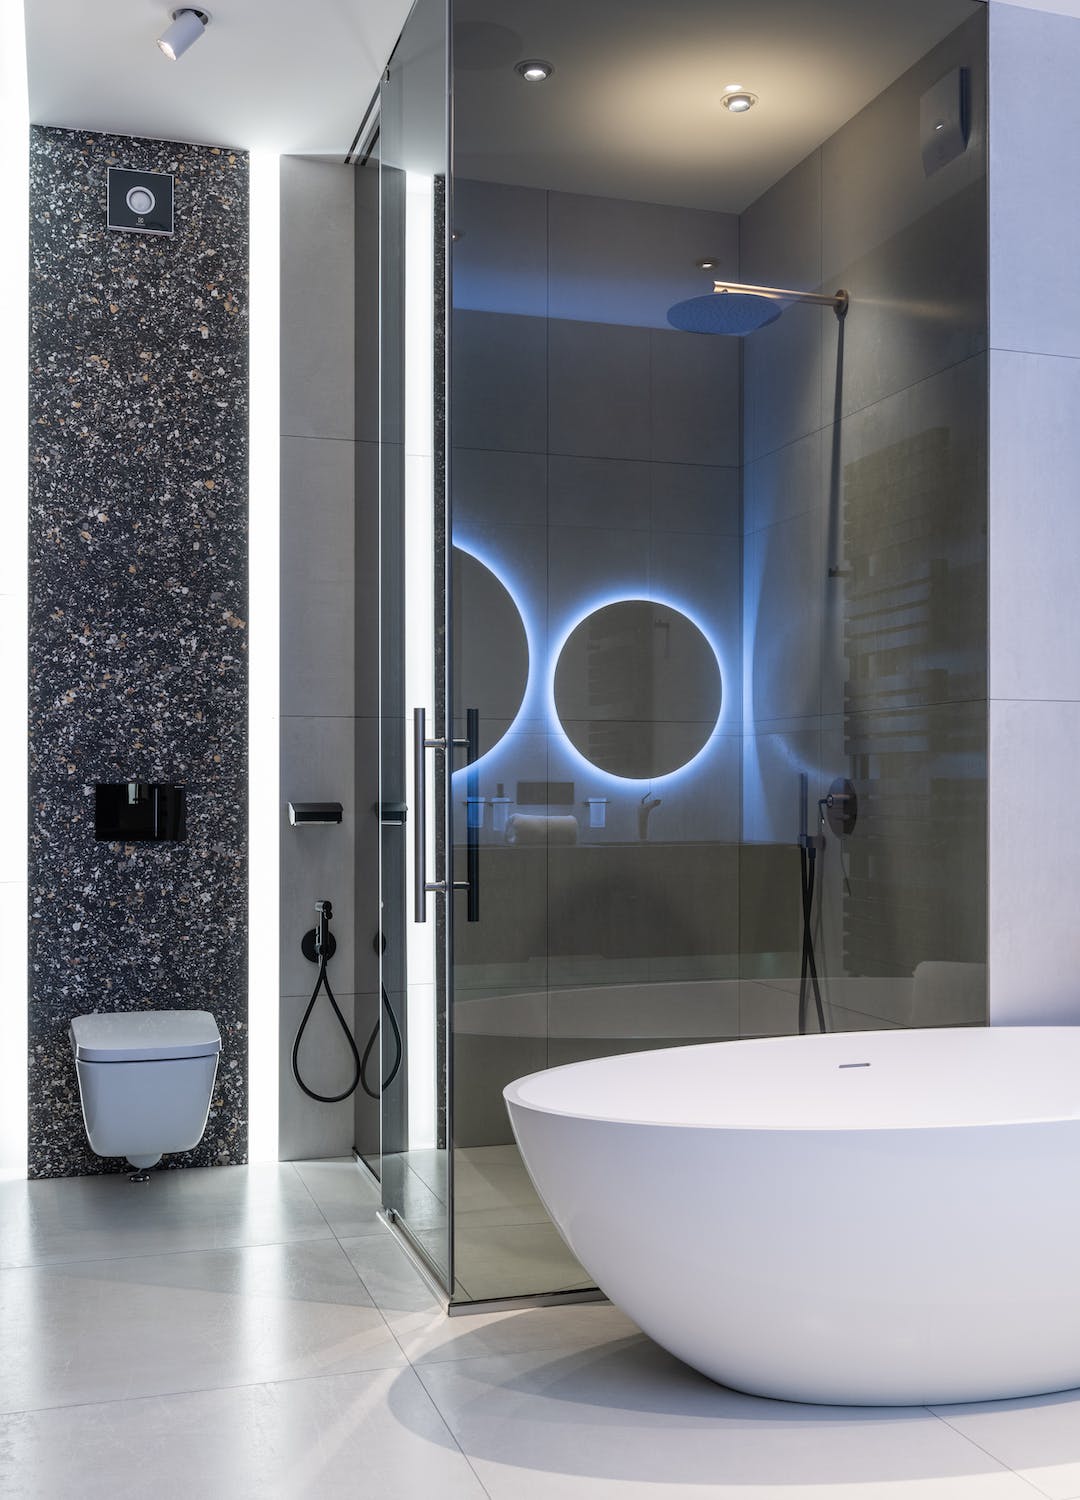 Luxurious Comfort: The Allure of a Thoughtful Bathroom Design